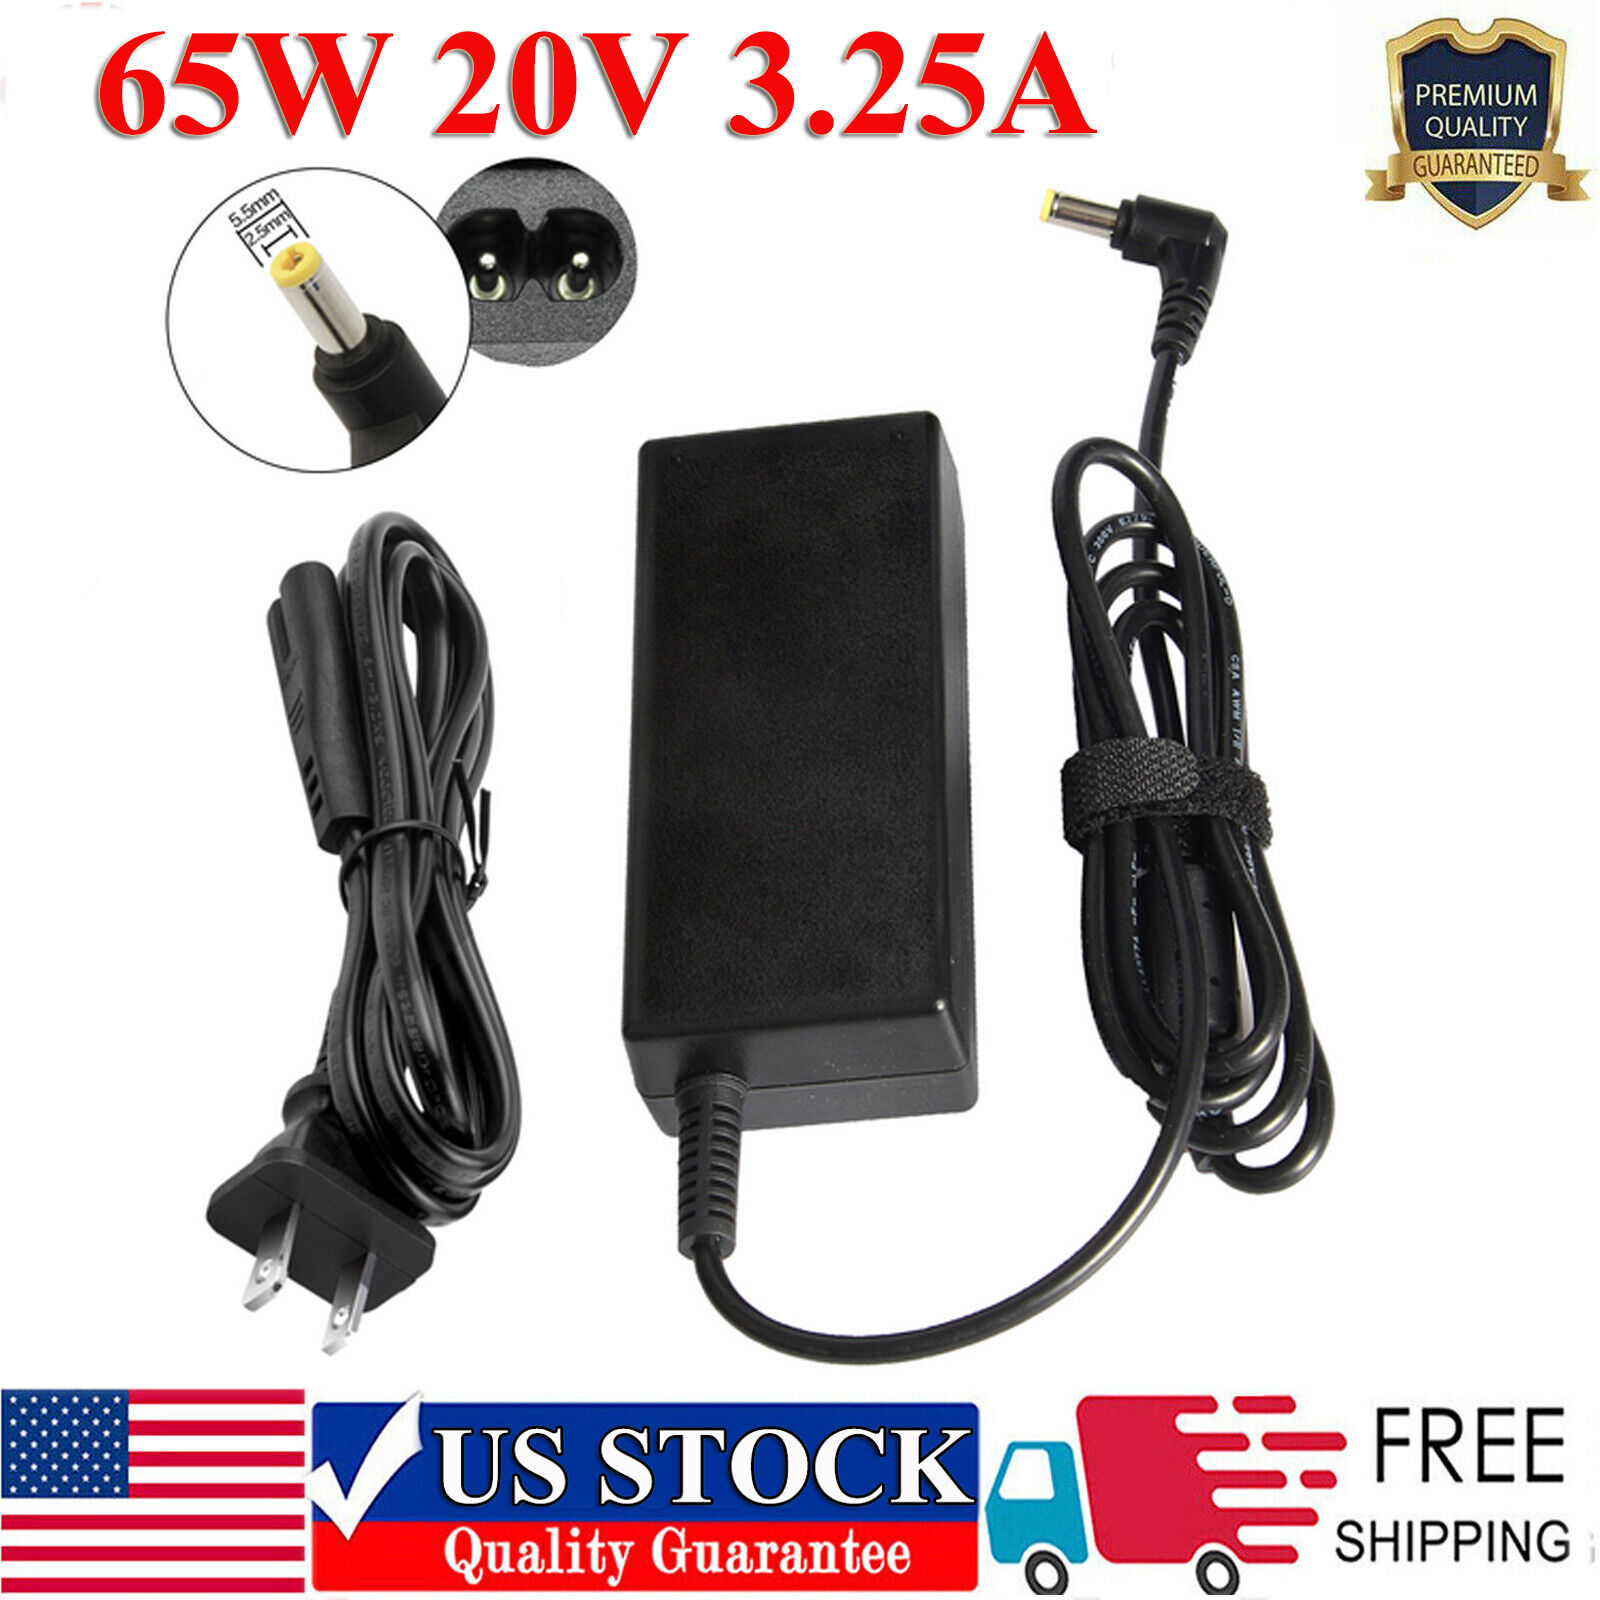 Adapter Charger for Lenovo IdeaPad S10-2 S12 S9e s10 s10-3 s10-3t s10e 20V 2A 